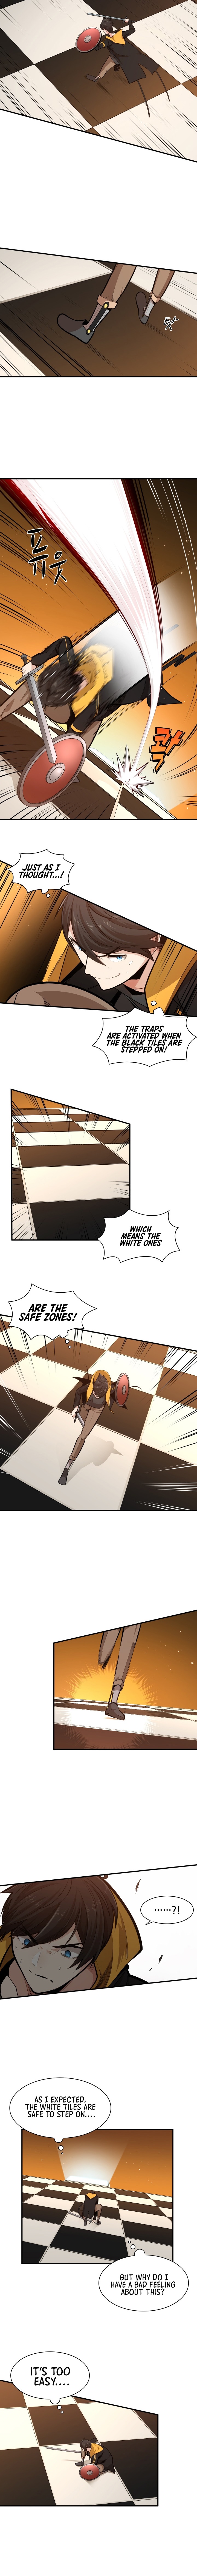 The Tutorial Is Too Hard - Page 4